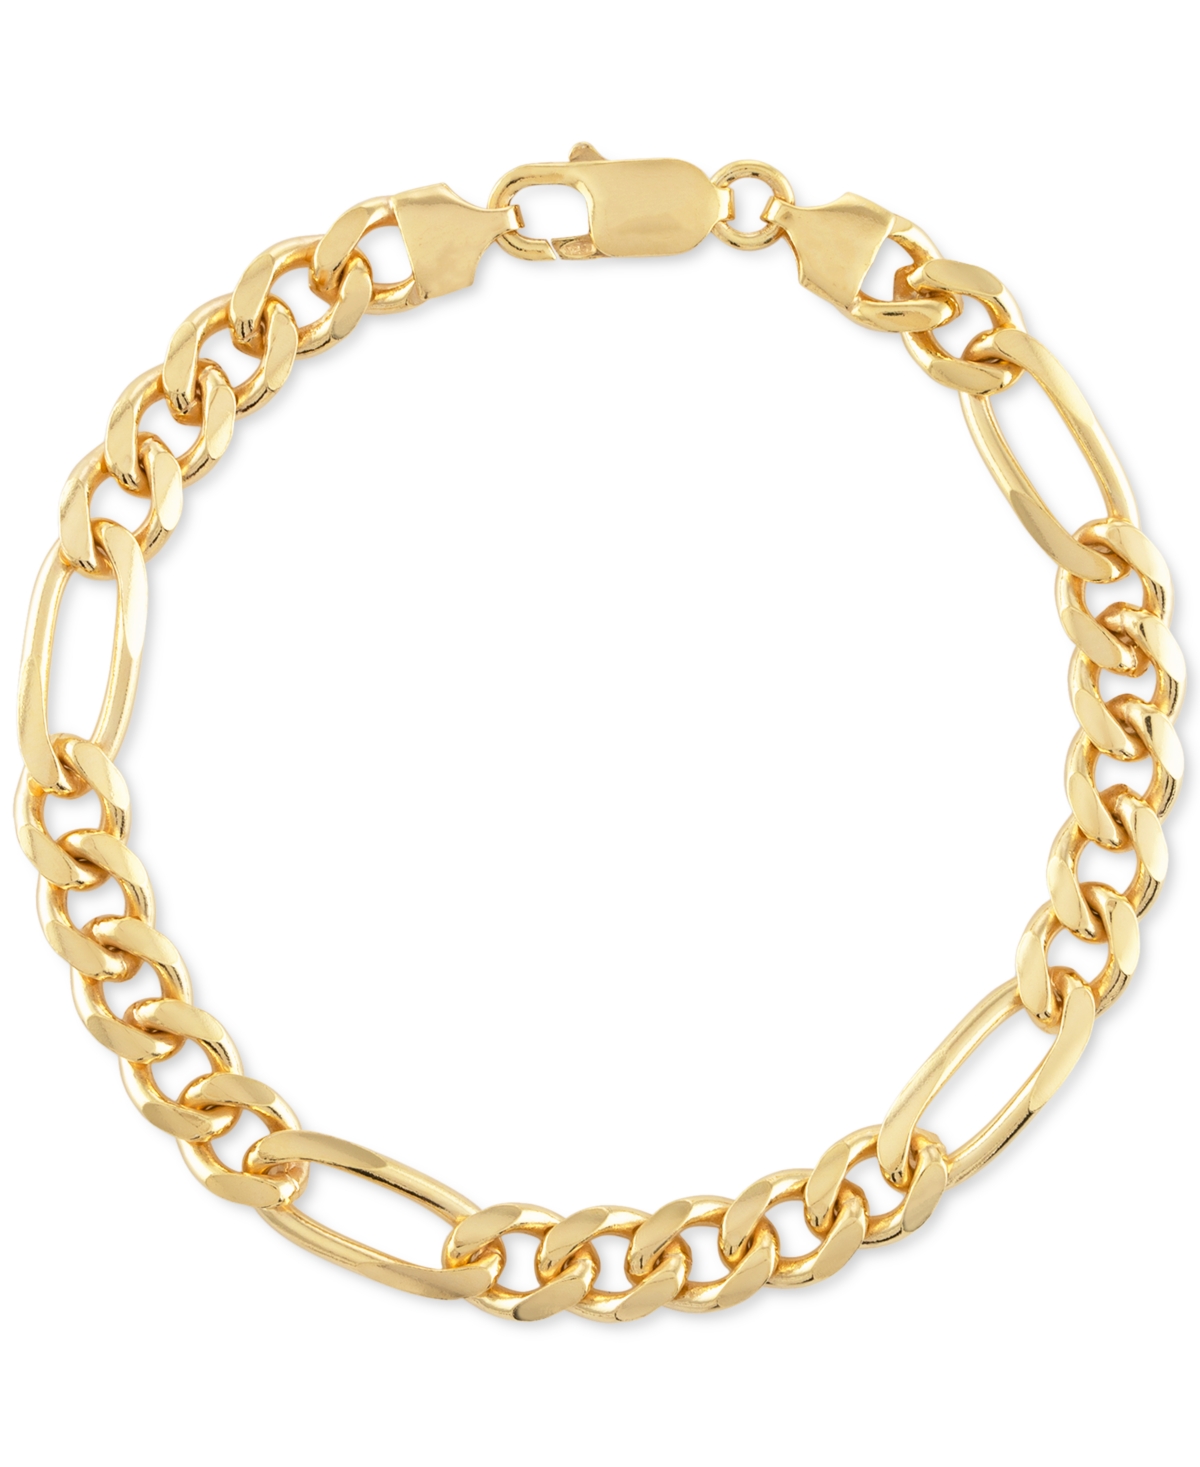 Esquire Men's Jewelry Cuban Figaro Link Bracelet, Created for Macy's